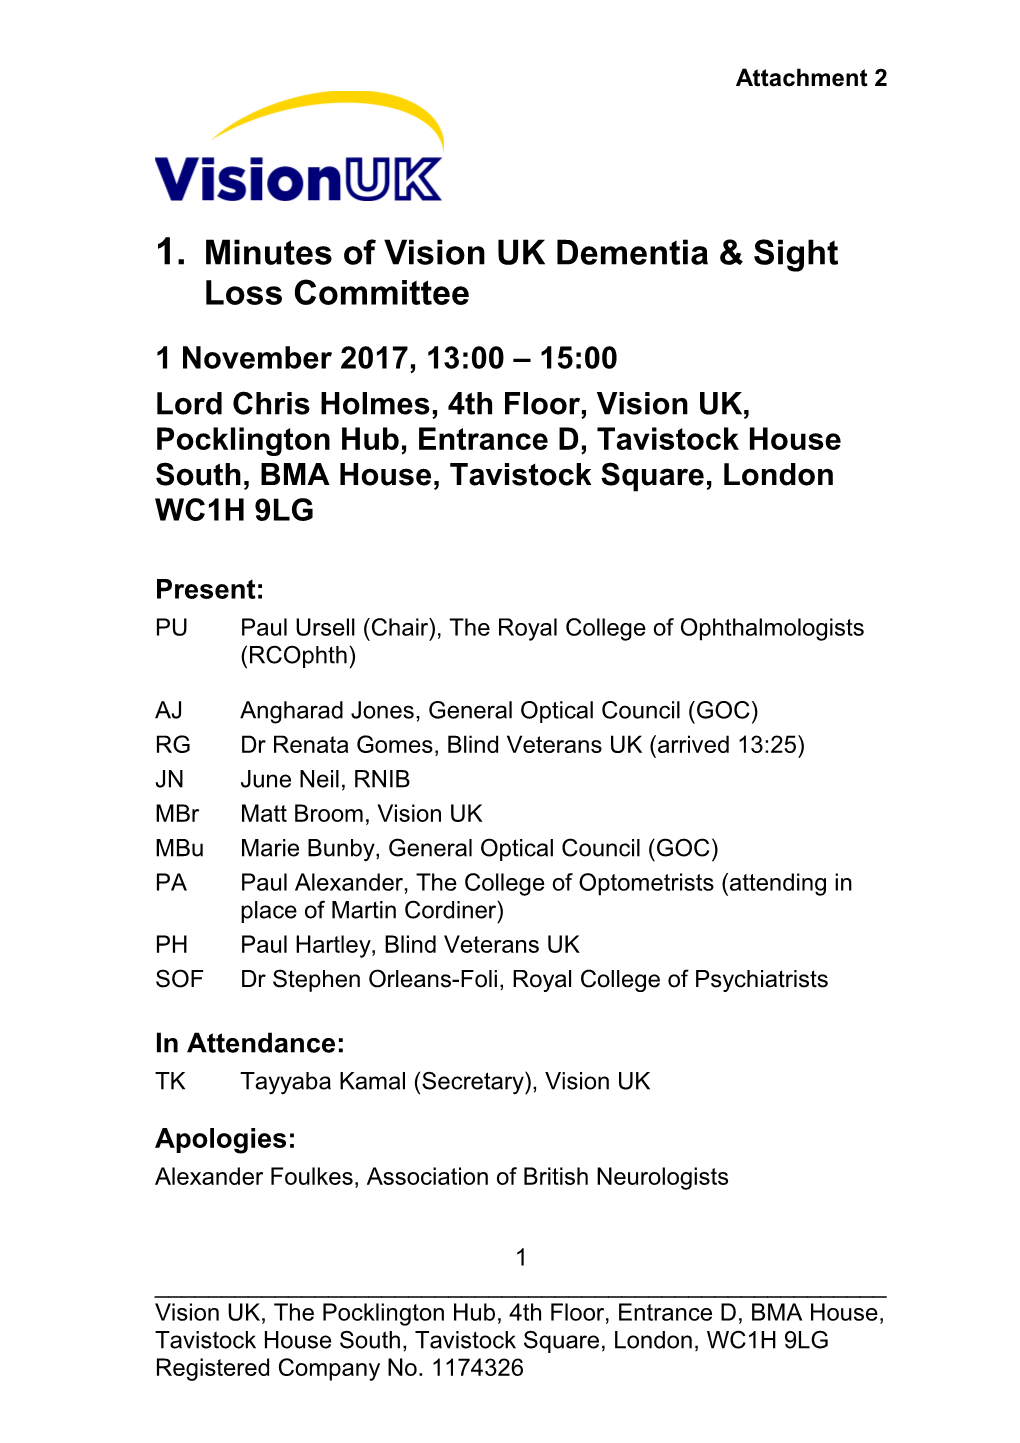 Minutes of Vision UK Dementia & Sight Loss Committee